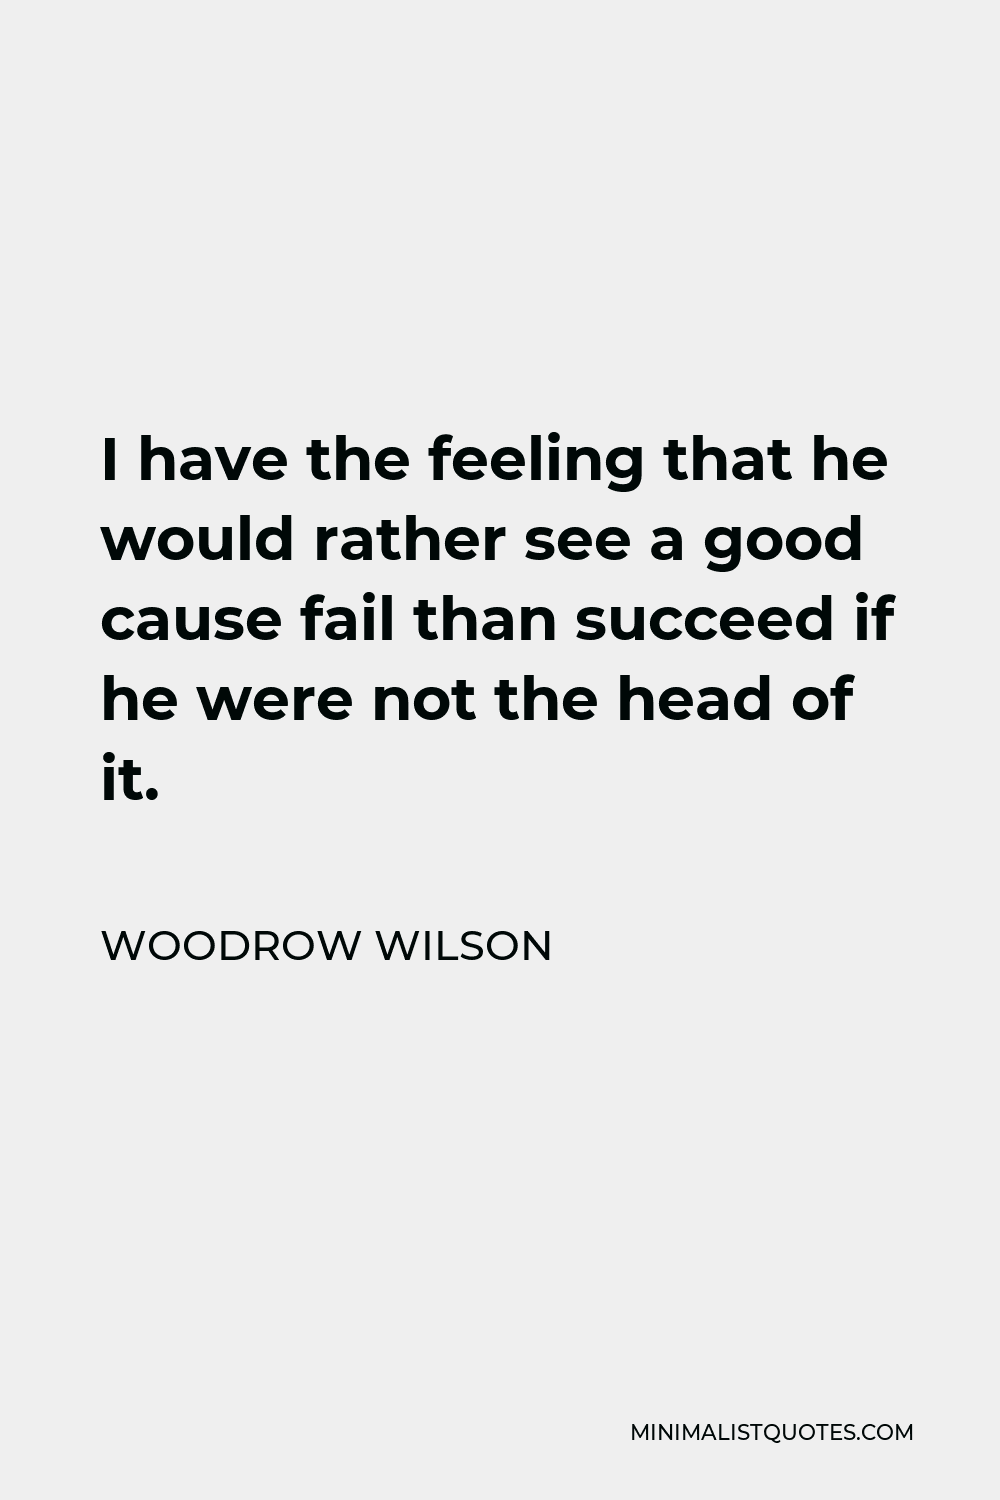 Woodrow Wilson Quote - I have the feeling that he would rather see a good cause fail than succeed if he were not the head of it.